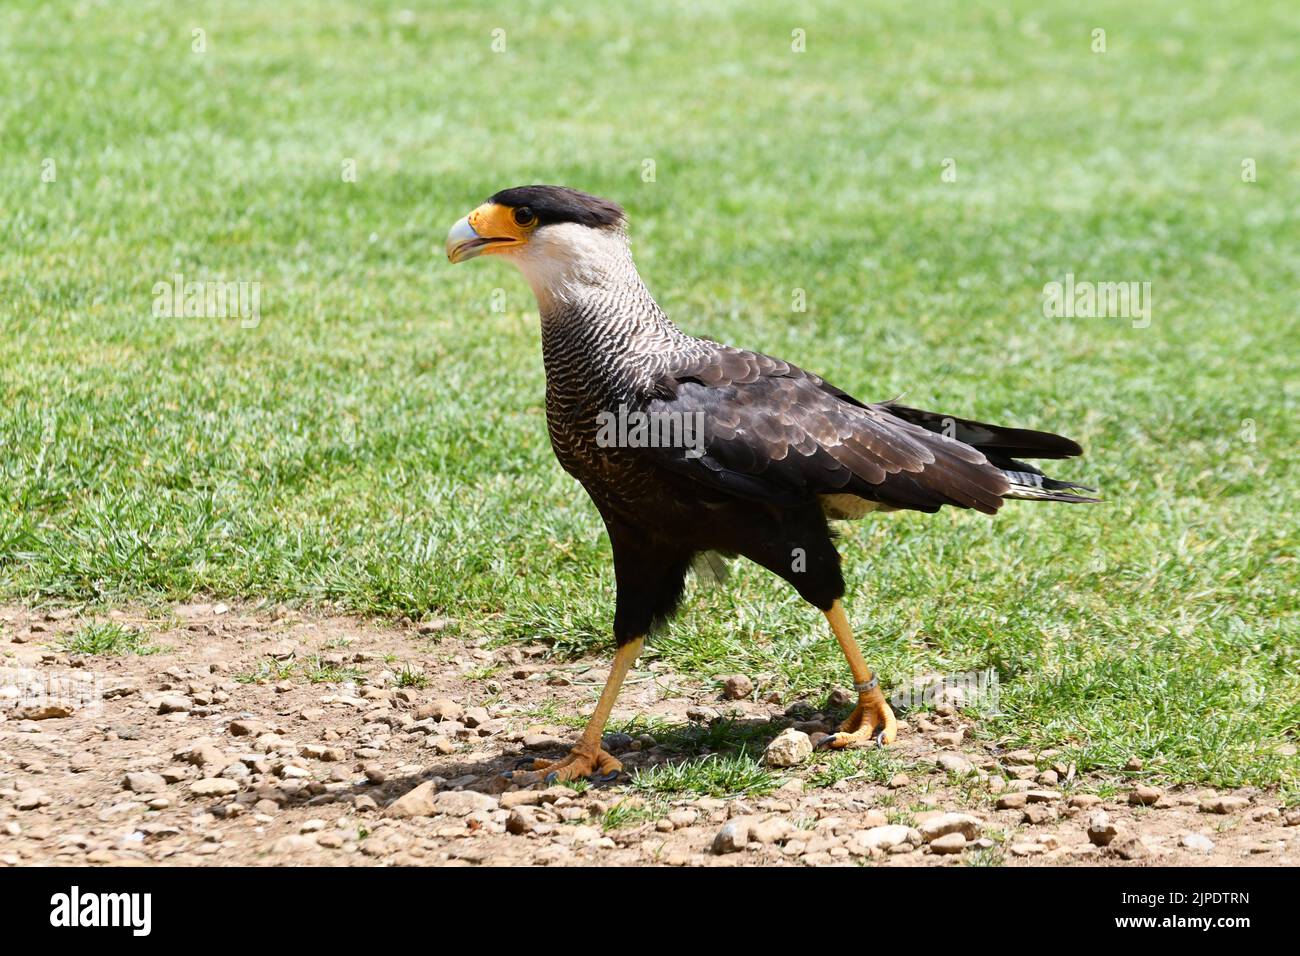 A Caracara bird at The Cotswold Falconry Centre, Moreton in Marsh, Gloucestershire, England, UK Stock Photo